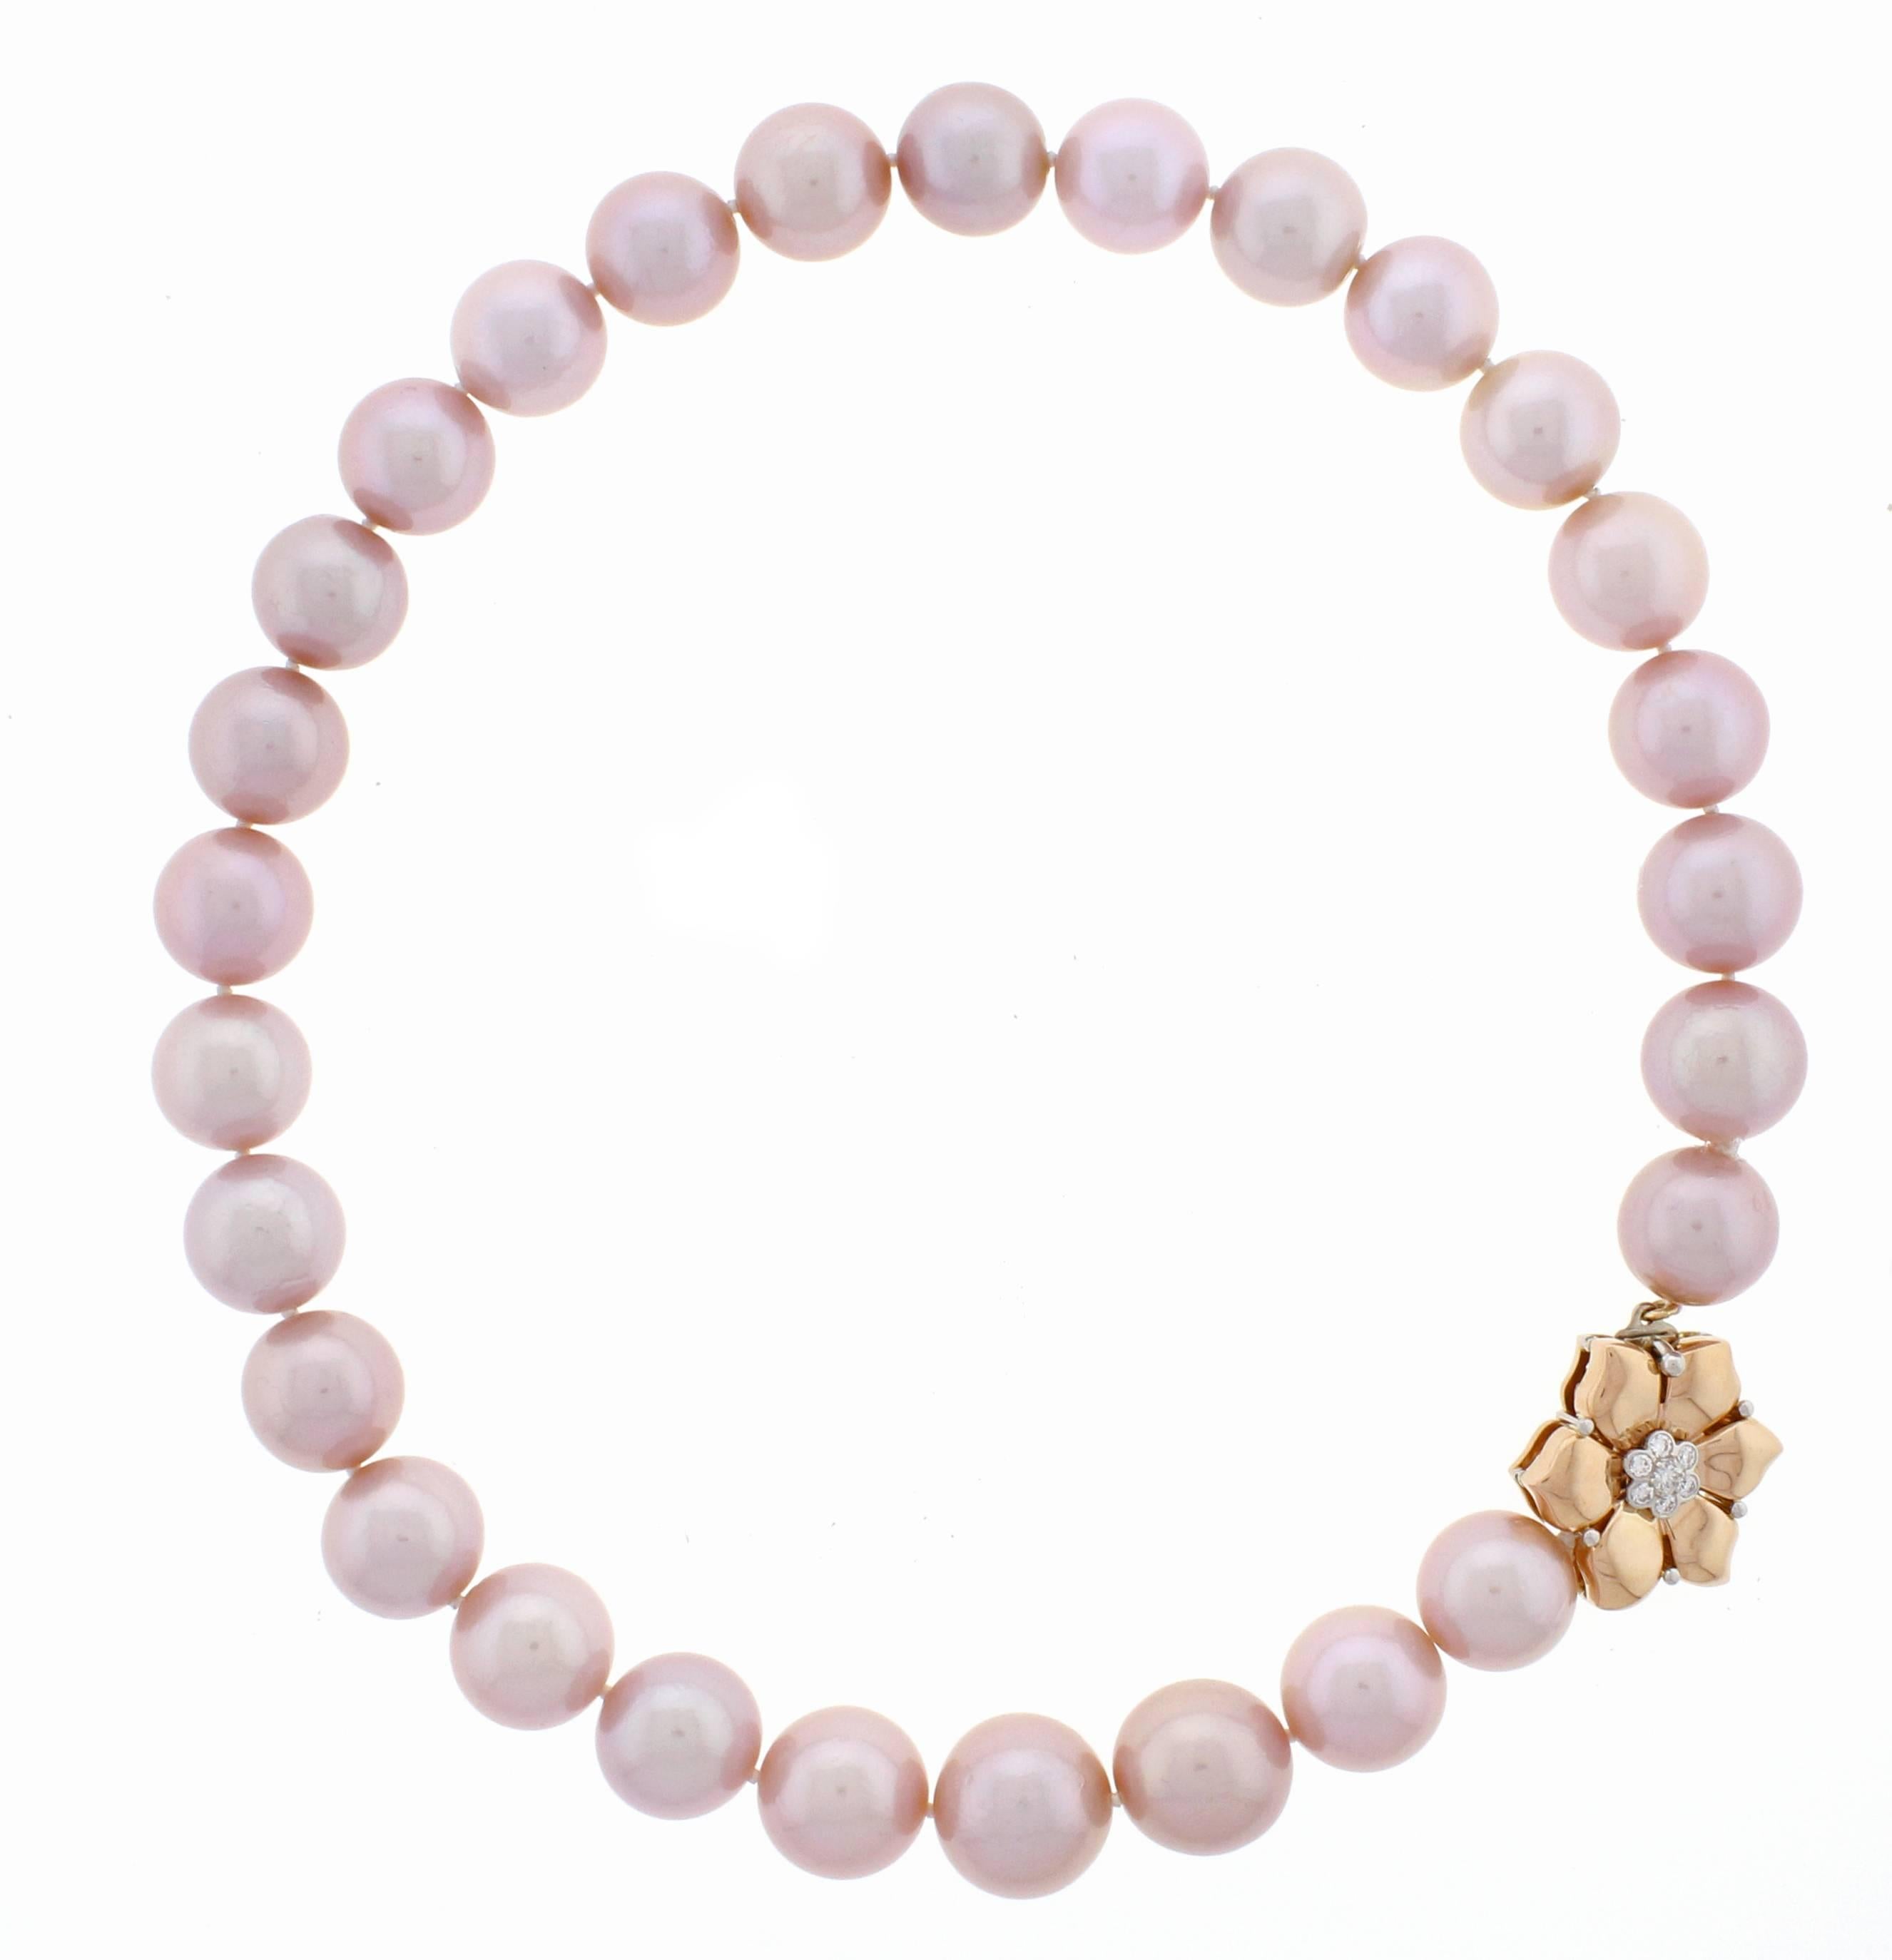 These magnificent natural color pink fresh water pearls graduate from 16-14mm.  The pink gold and platinum clasp is highlighted by .35 carats of diamonds. Pearl of this natural color and size are quite rare with only a limited number of strands